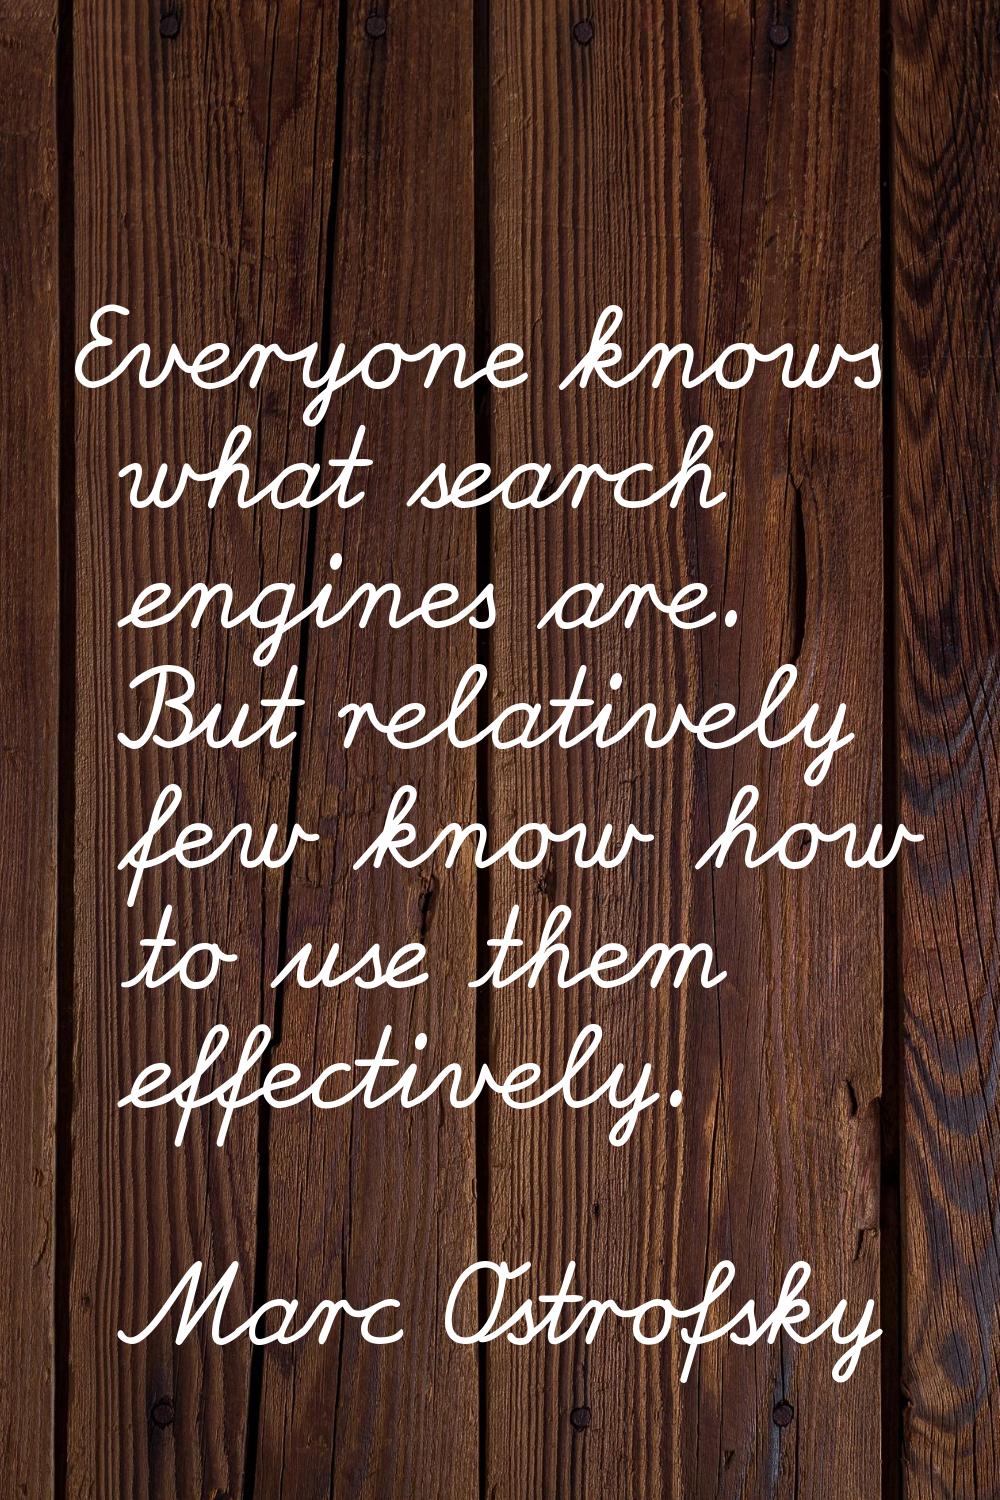 Everyone knows what search engines are. But relatively few know how to use them effectively.